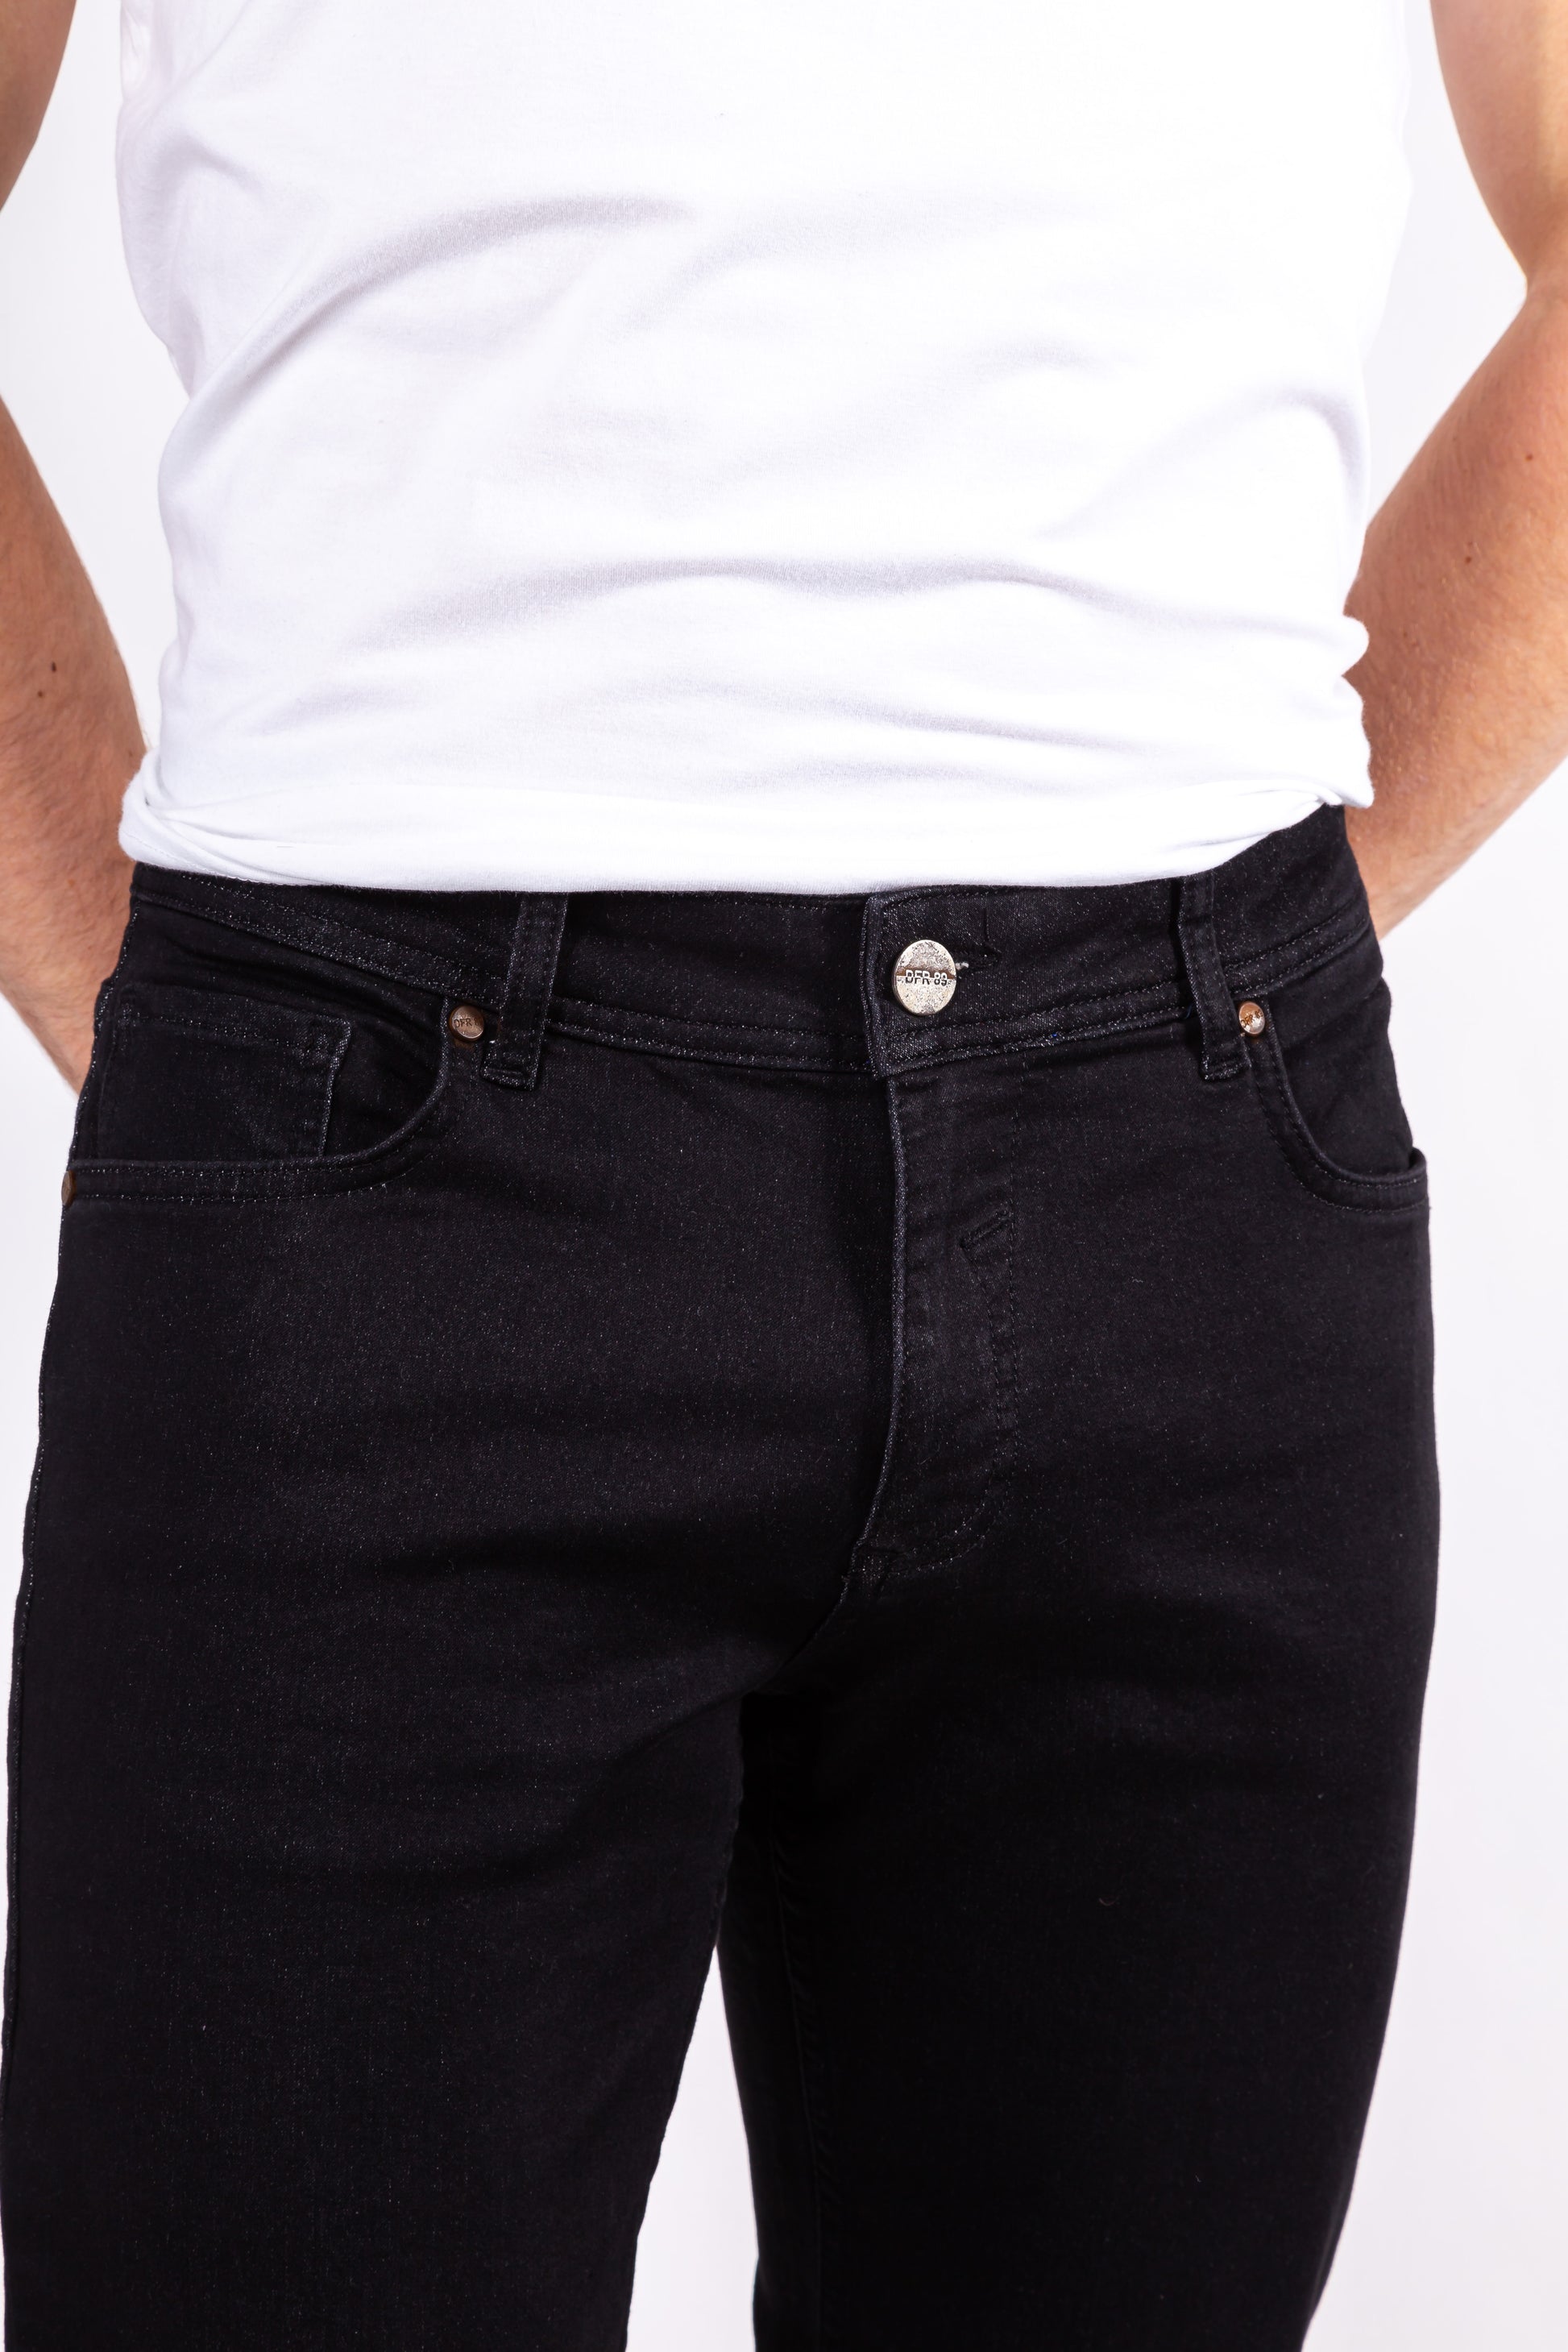 With a comfortable, stretchy cotton like no other, the Forrester model from DFR89 is a great pair of men's premium black denim jeans for any occasion.